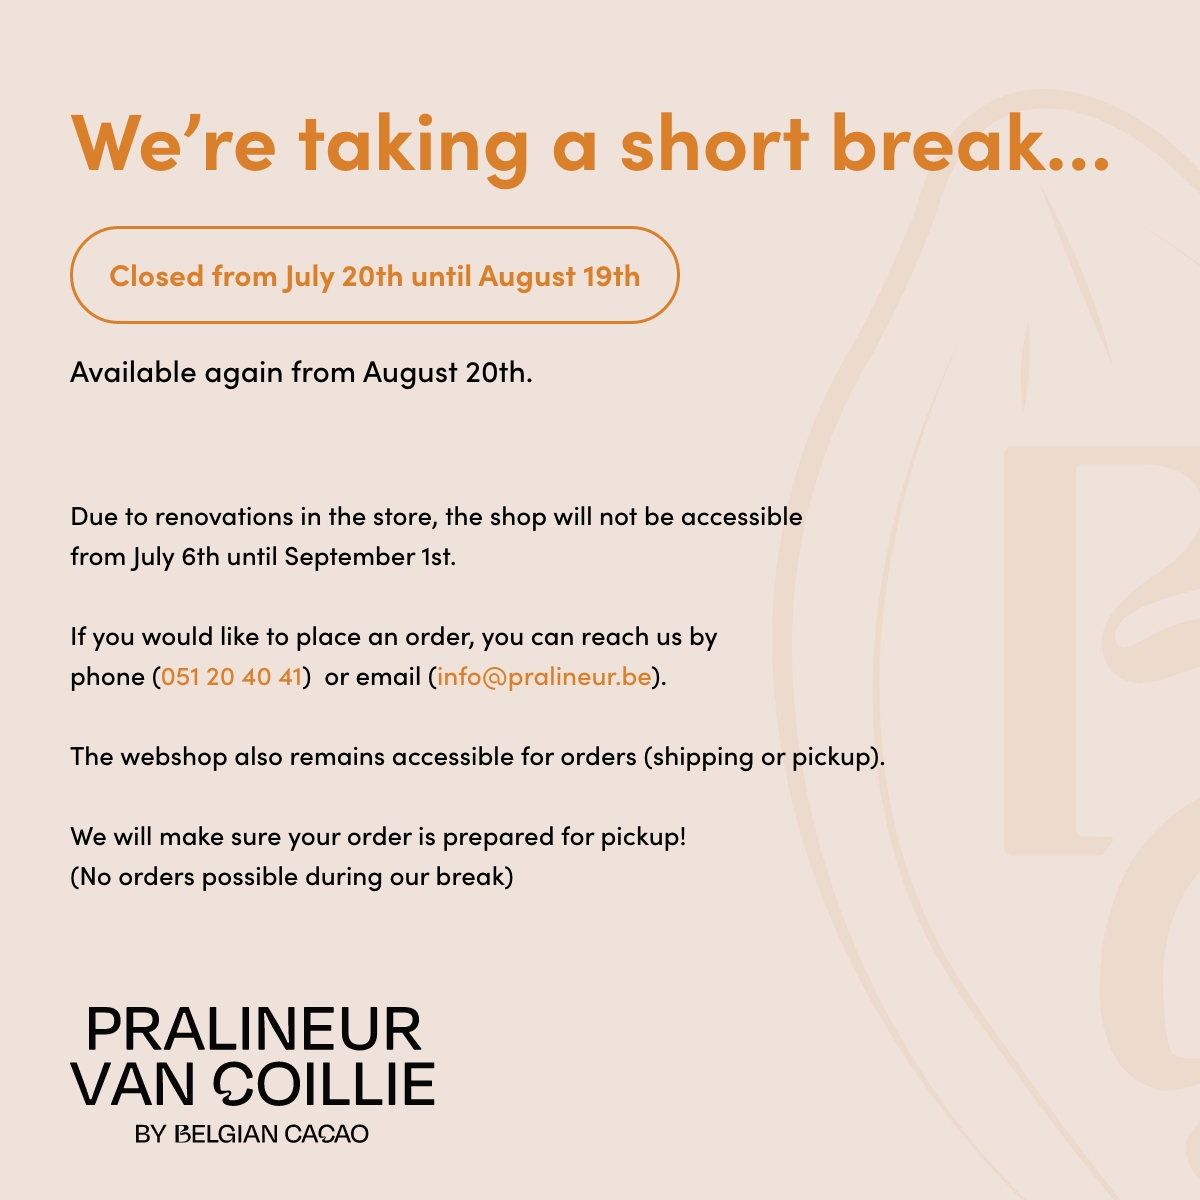 We're taking a short break... Closed from July 20th until August 19th